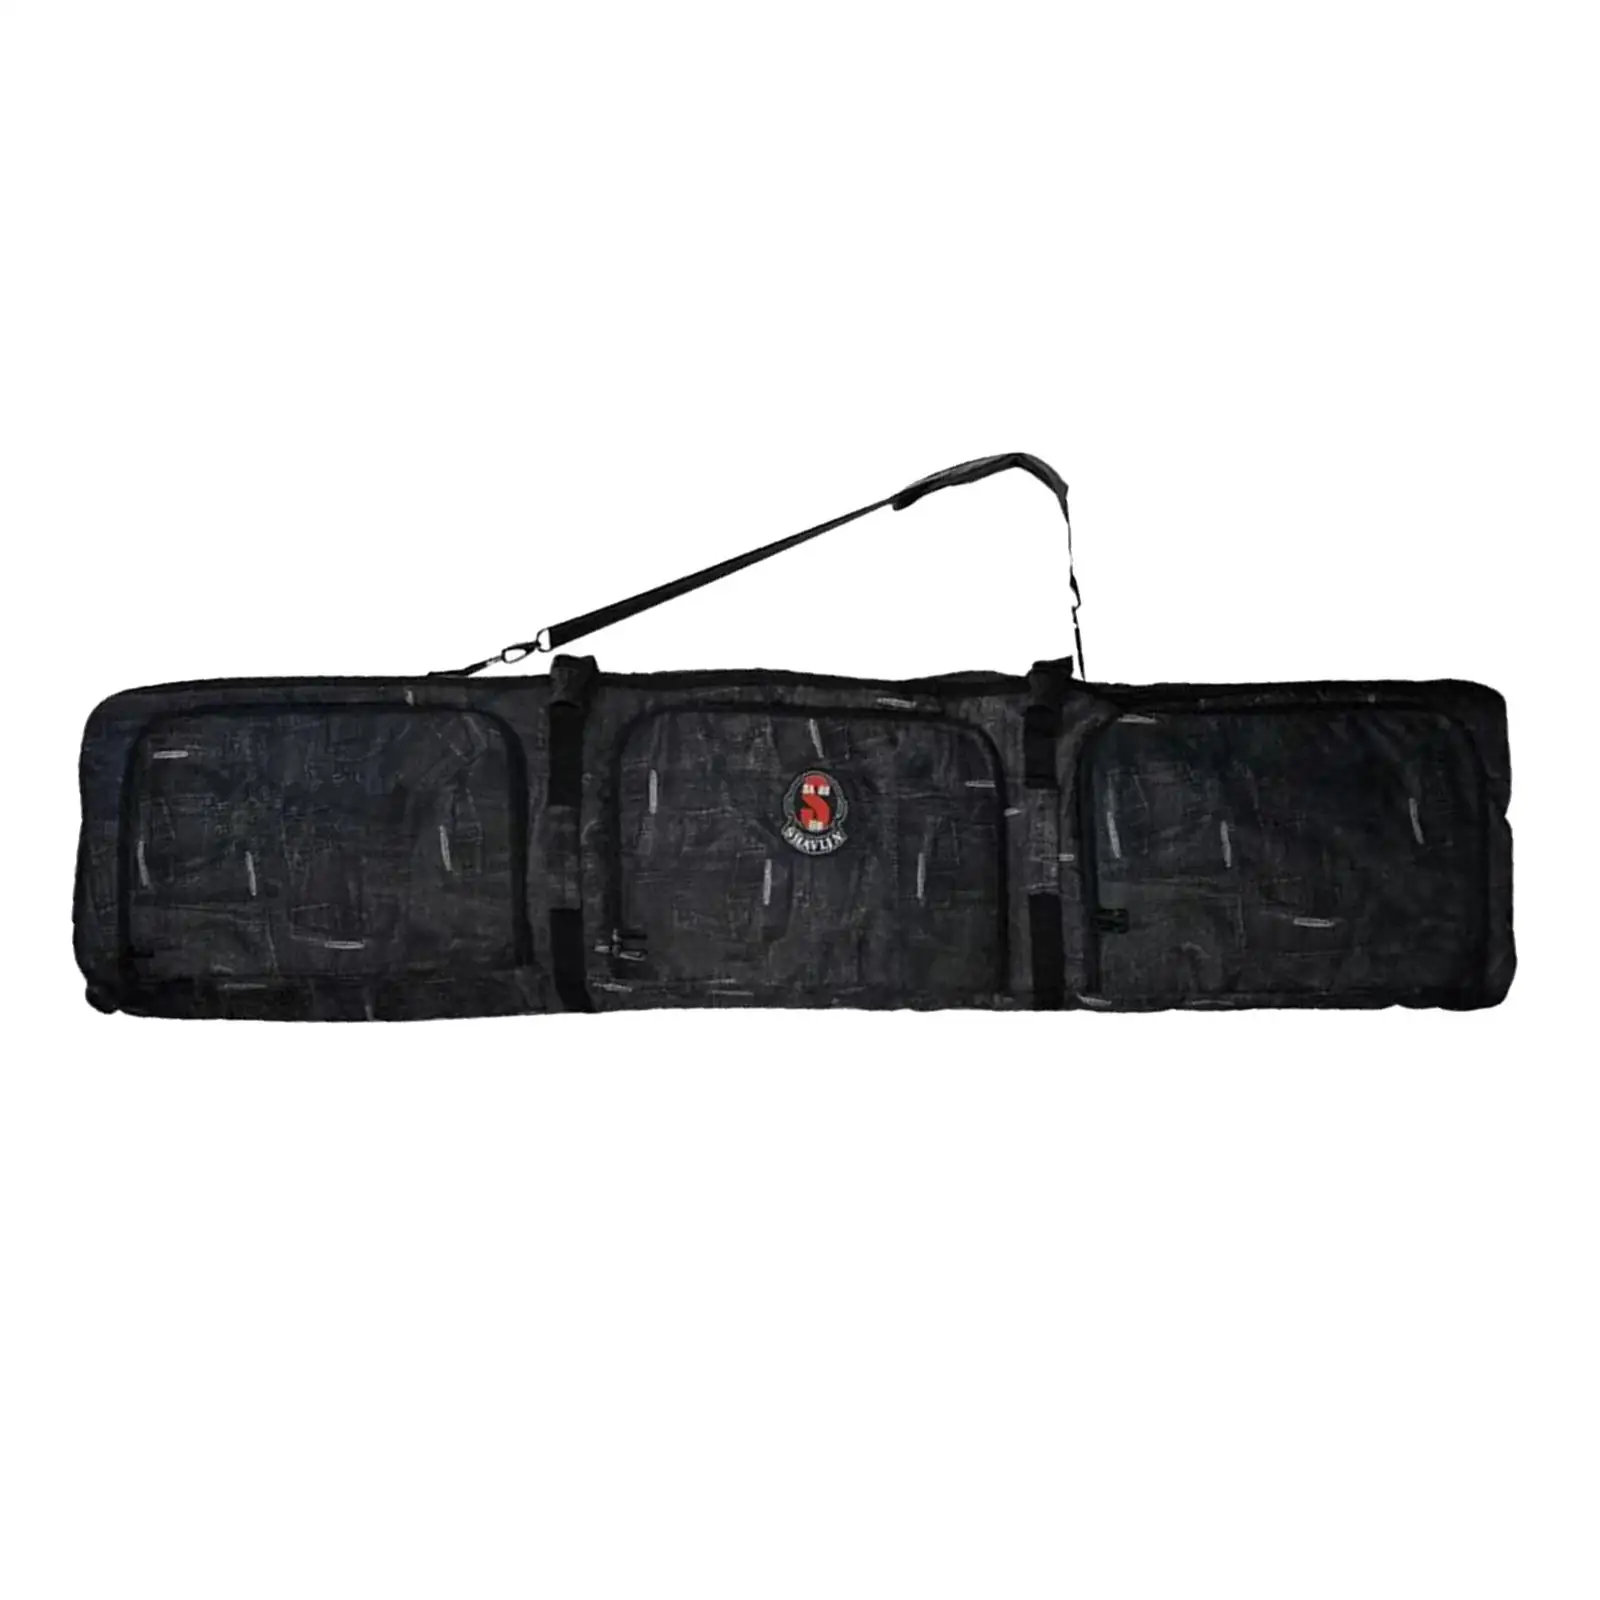 Snowboard Bag with Wheels Snowboard Travel Bags for Flying Waterproof for Women Men Transport Snowboarding Boards Winter Gloves